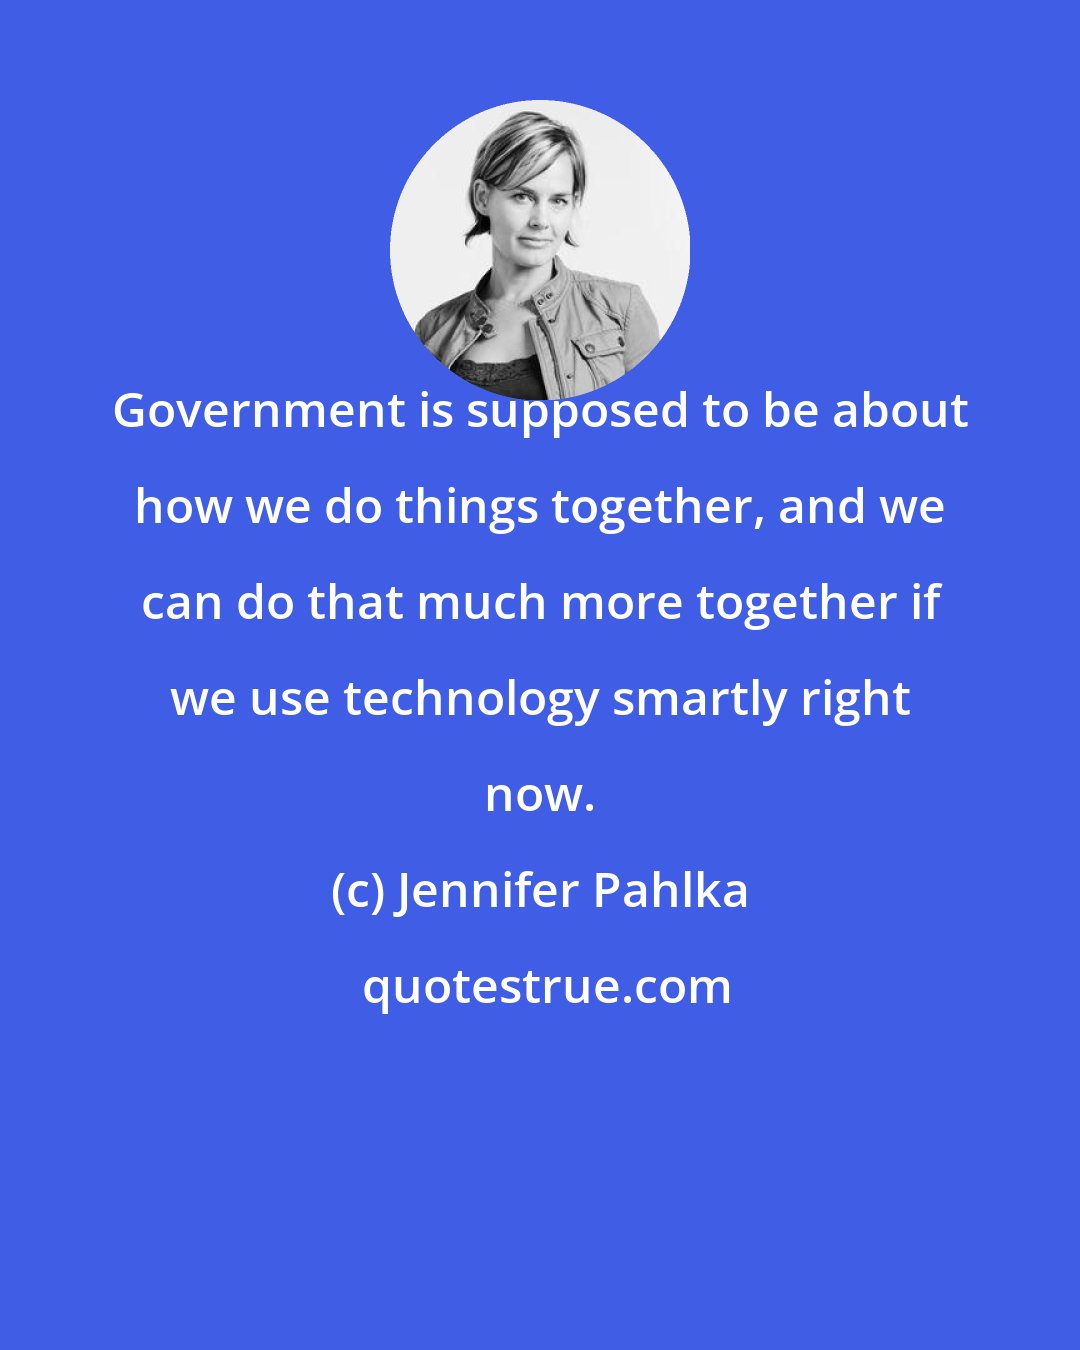 Jennifer Pahlka: Government is supposed to be about how we do things together, and we can do that much more together if we use technology smartly right now.